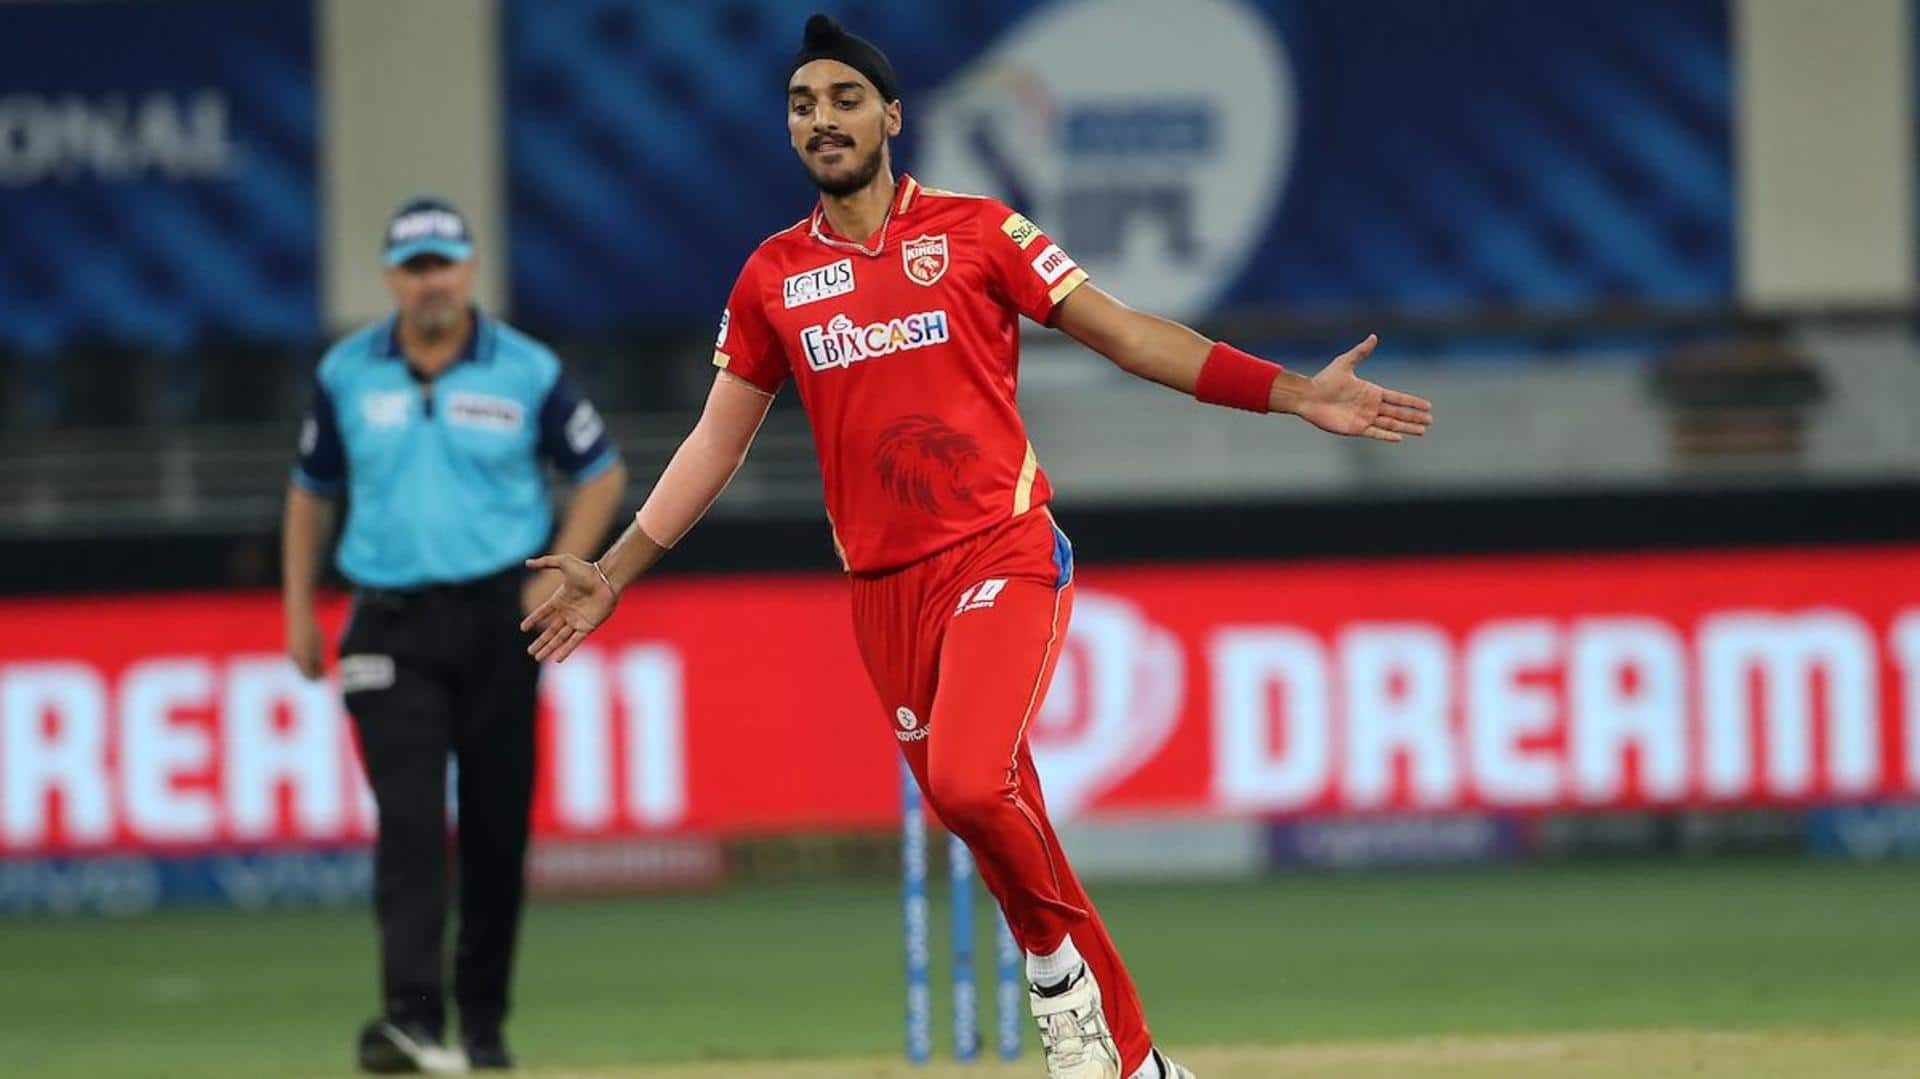 Arshdeep Singh races to 50 IPL wickets with four-fer: Stats 